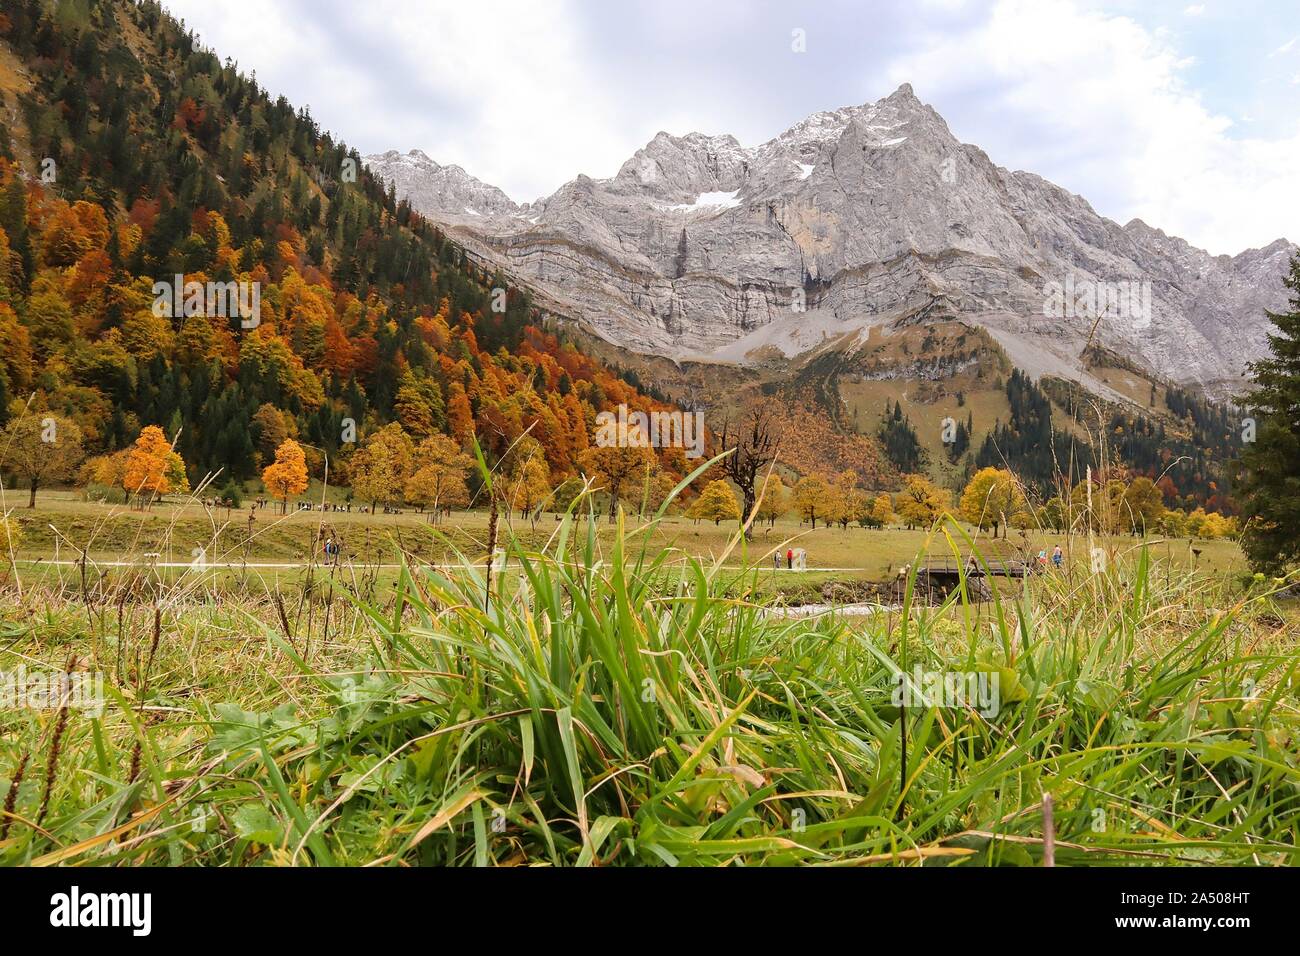 Eng, Austria 14.10. 2019: Impressions Grosser Ahornboden - 14.10.2019 Grosser Ahornboden in the Engtal. At the end of the valley the village of Eng in Tyrol, surrounded by the Karwendel mountains of Eiskarlspitze and Spritzkarspitze, the trademark is the numerous maple trees | usage worldwide Stock Photo